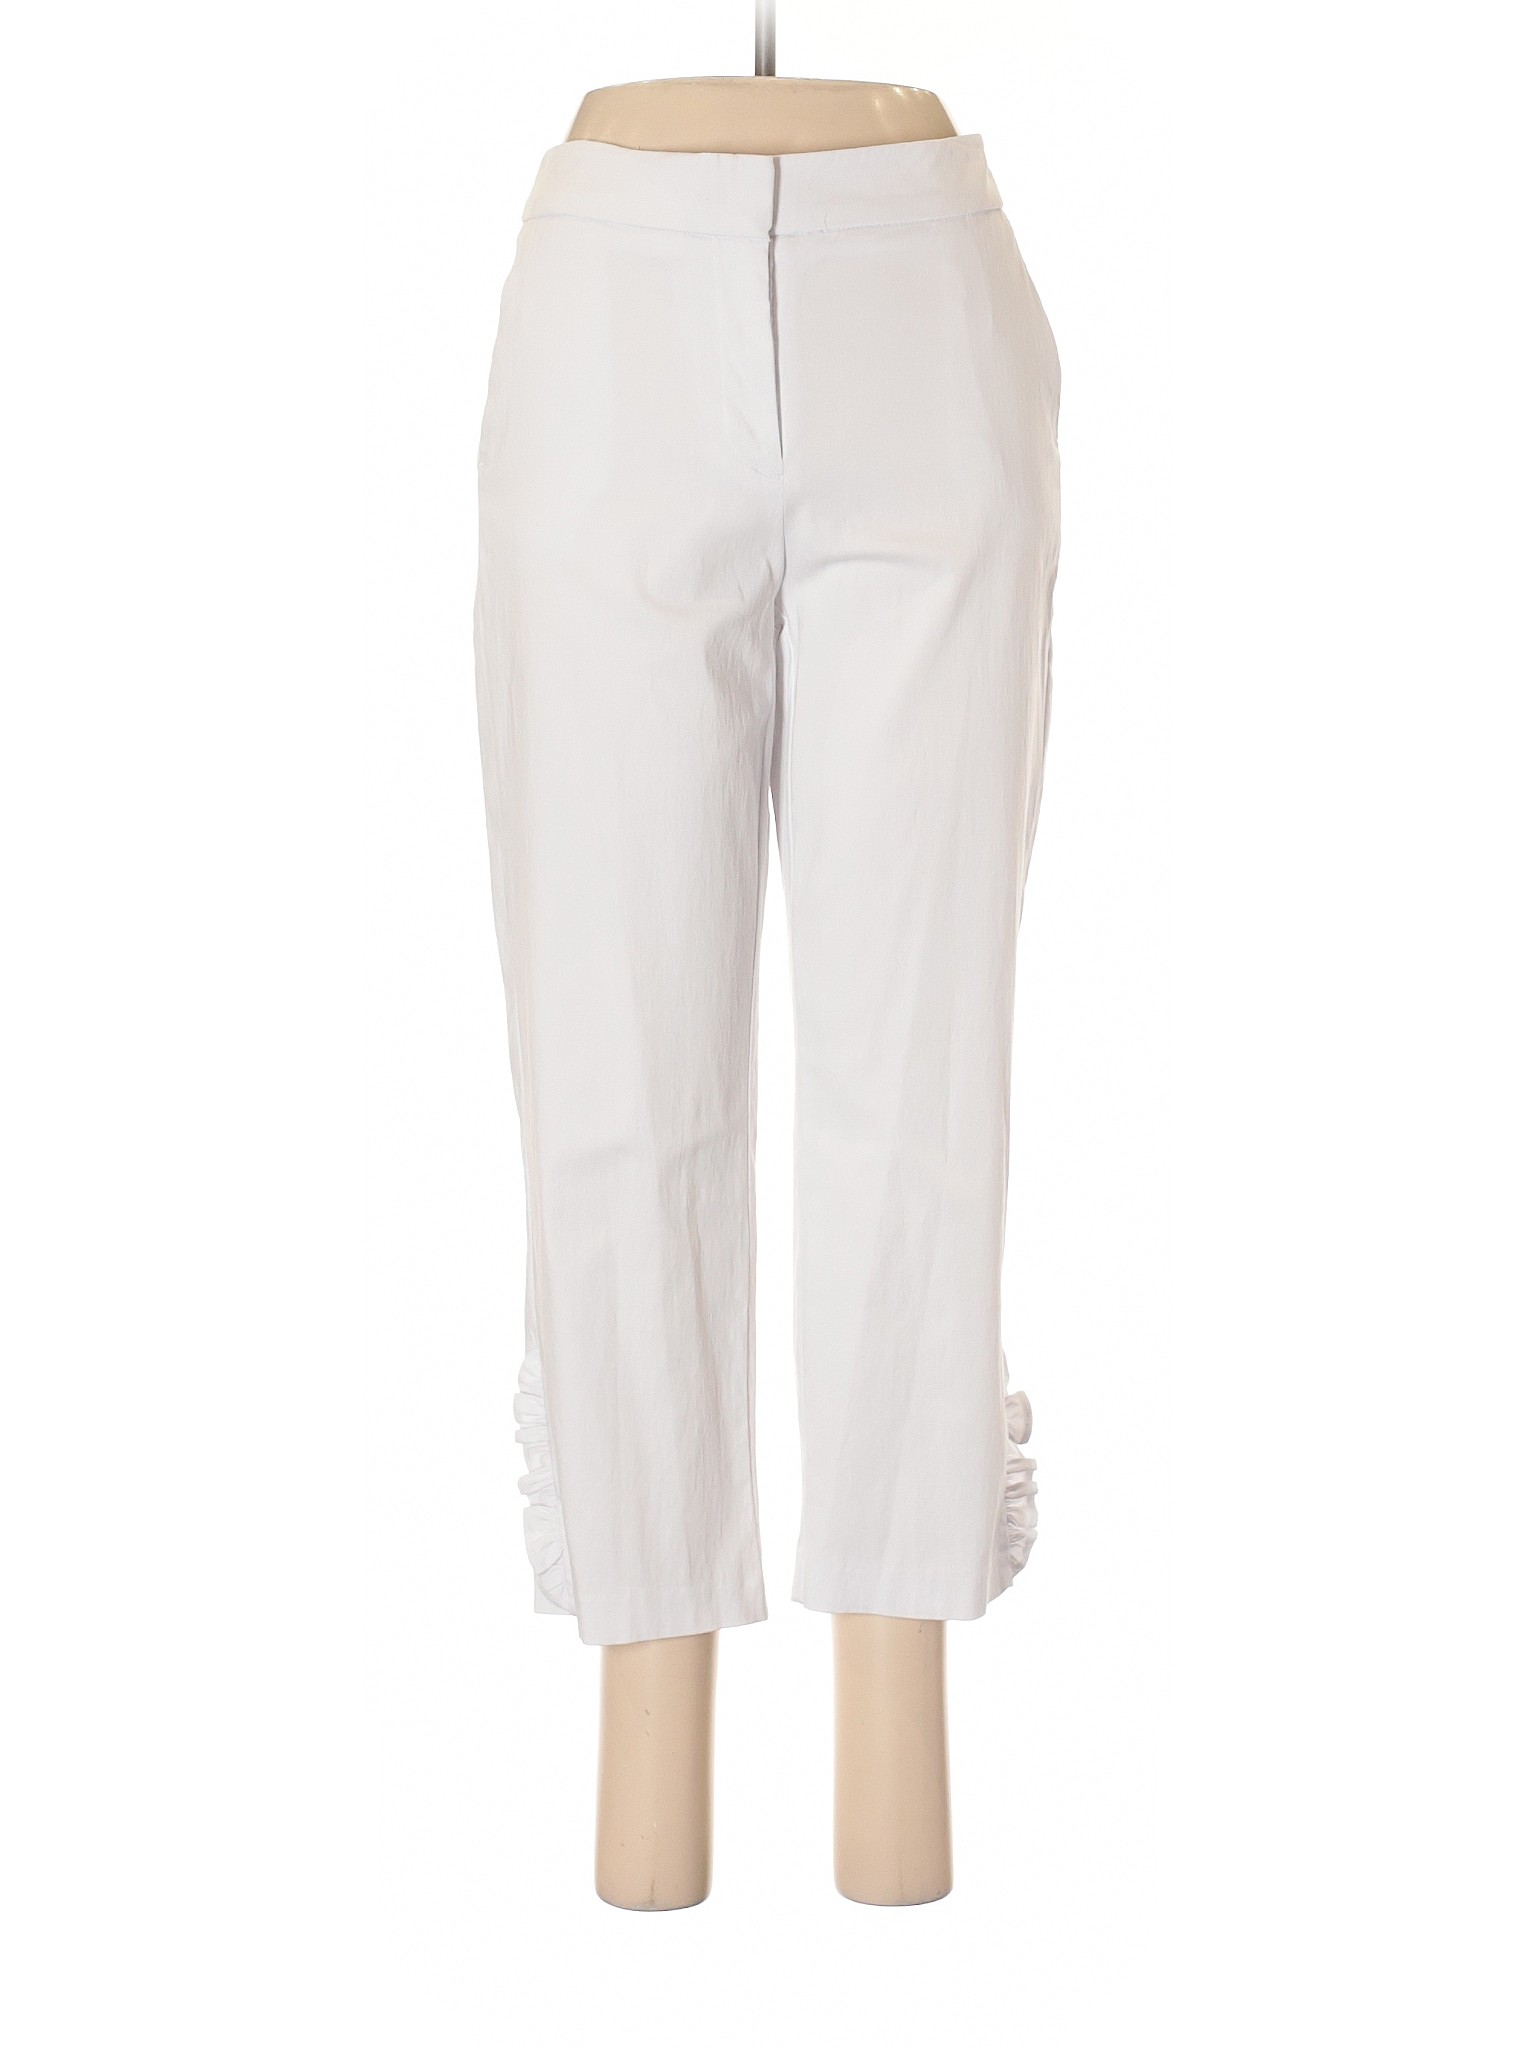 Counterparts Solid White Casual Pants Size 8 - 86% off | thredUP